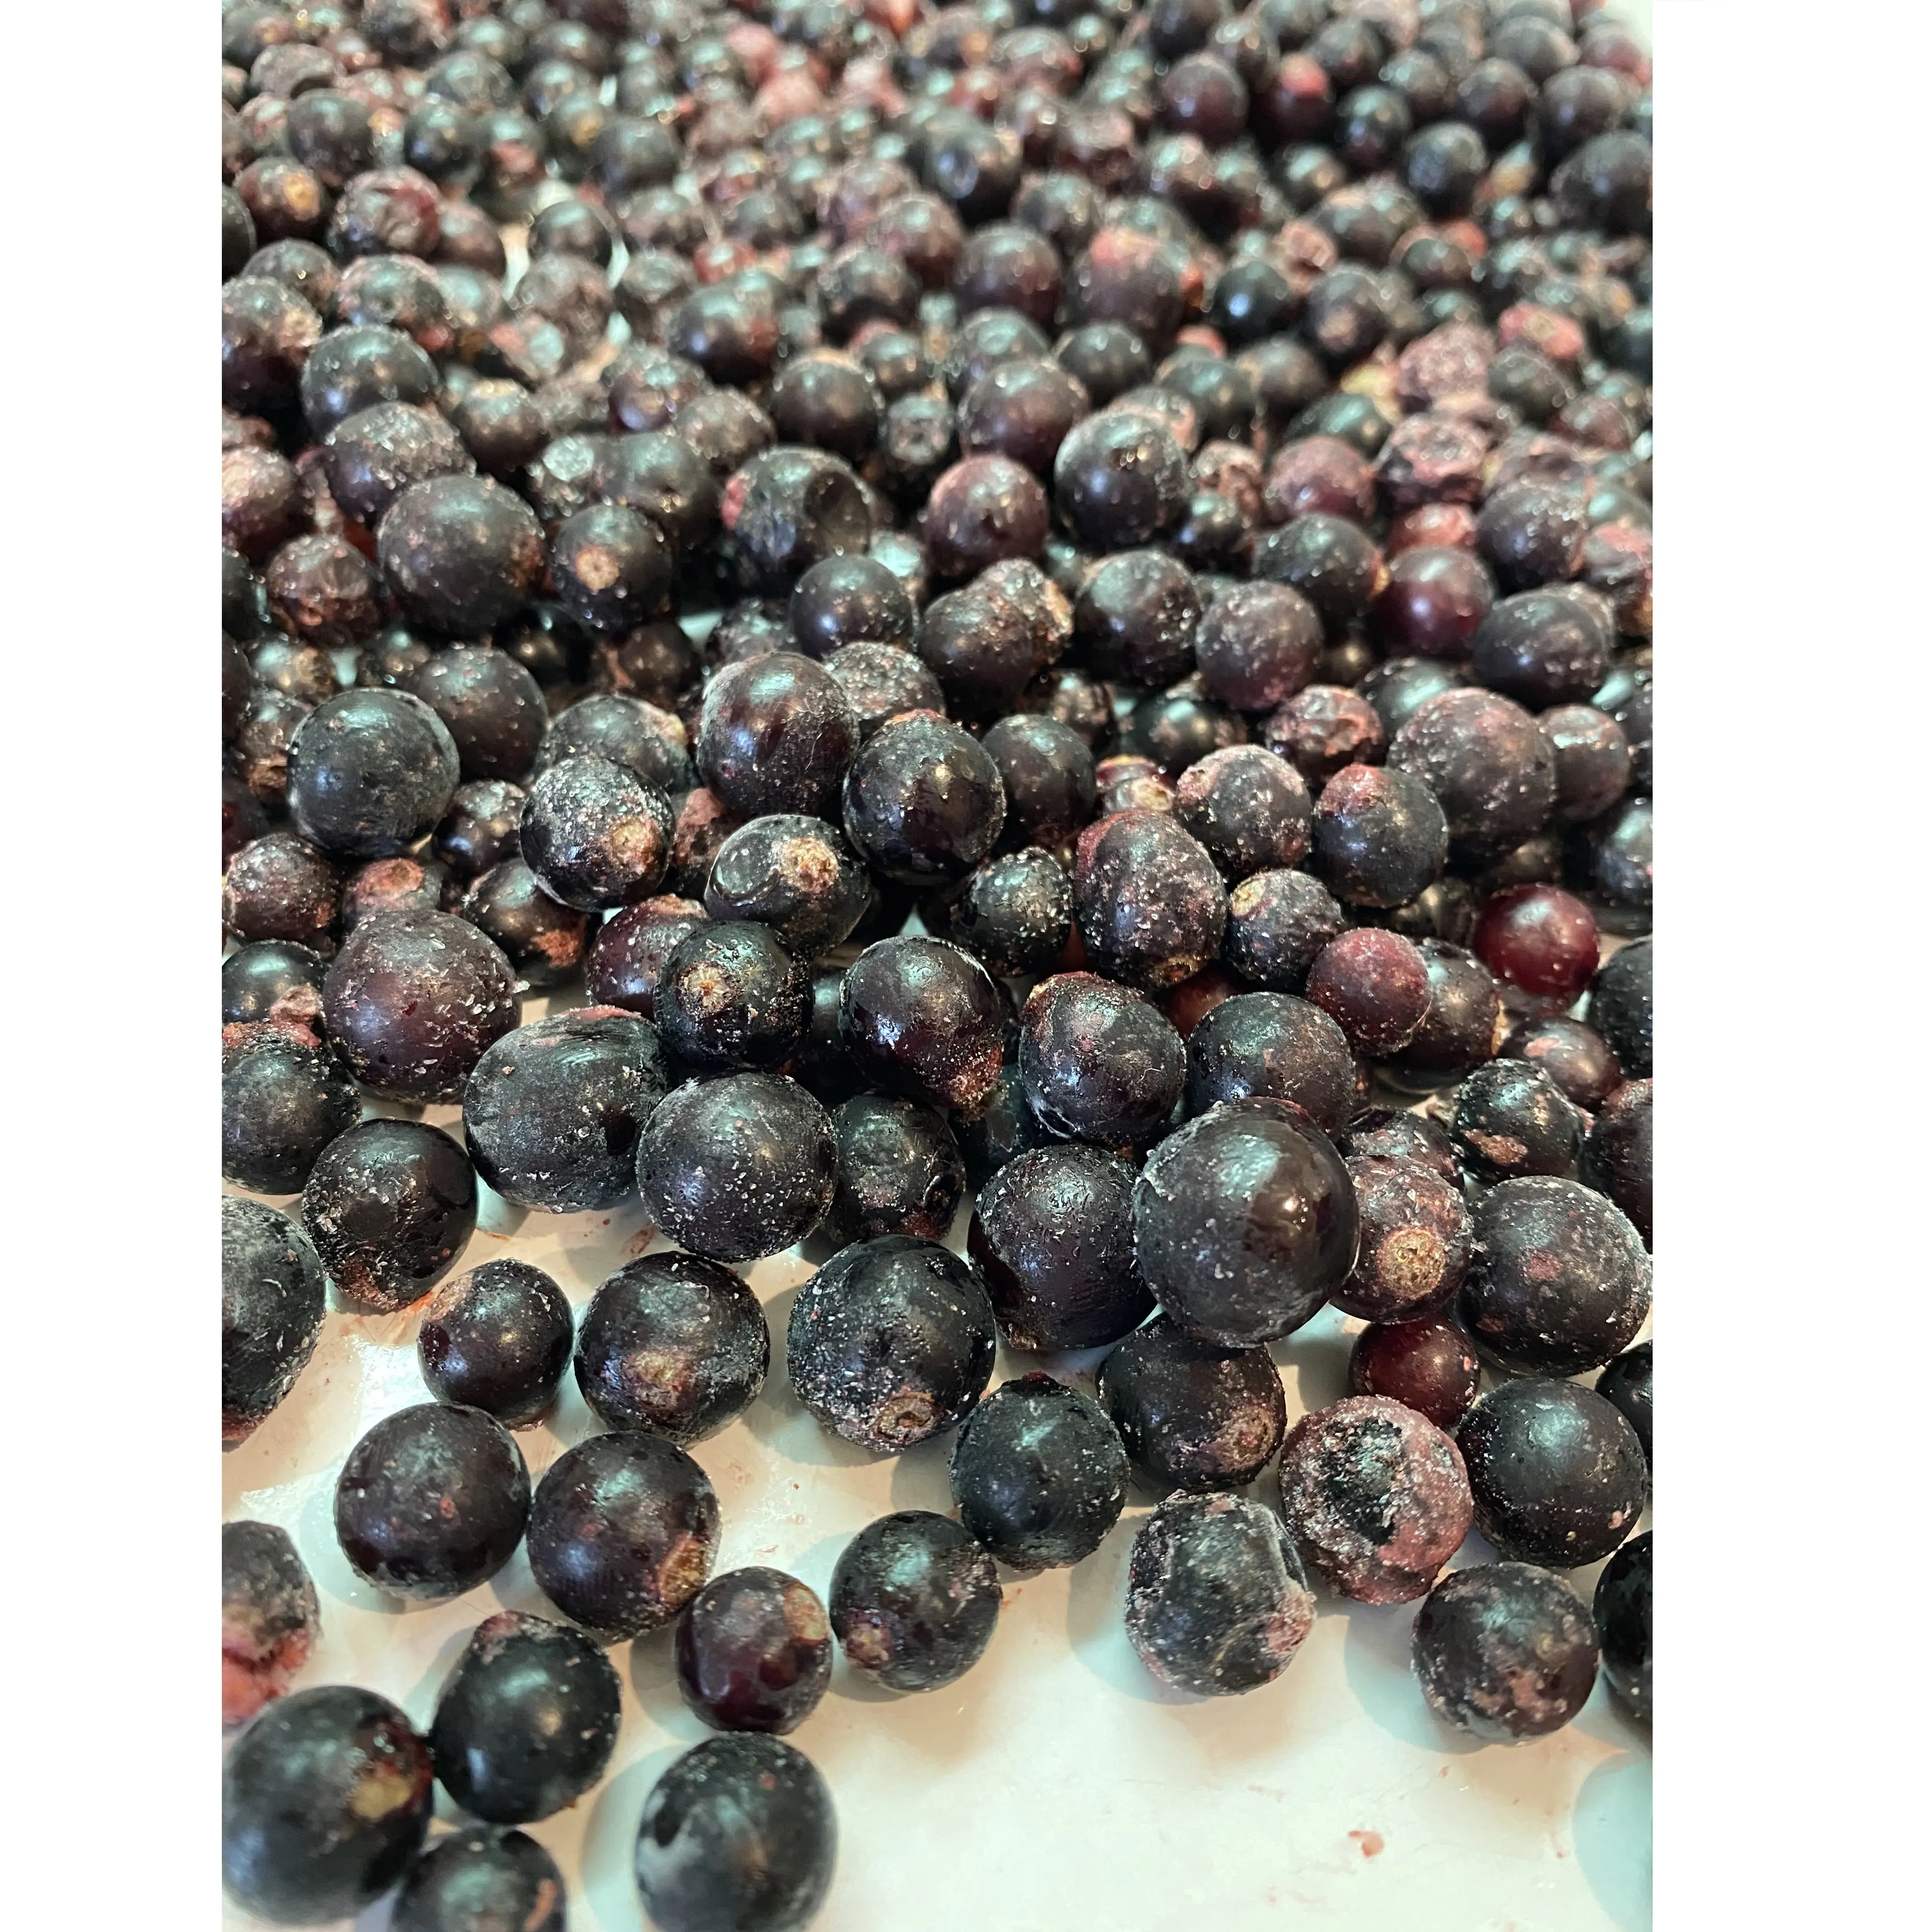 100% Natural Products Food Grade Frozen Berries Organic IQF Box Bag Packaging Frozen Fruit Black Currant